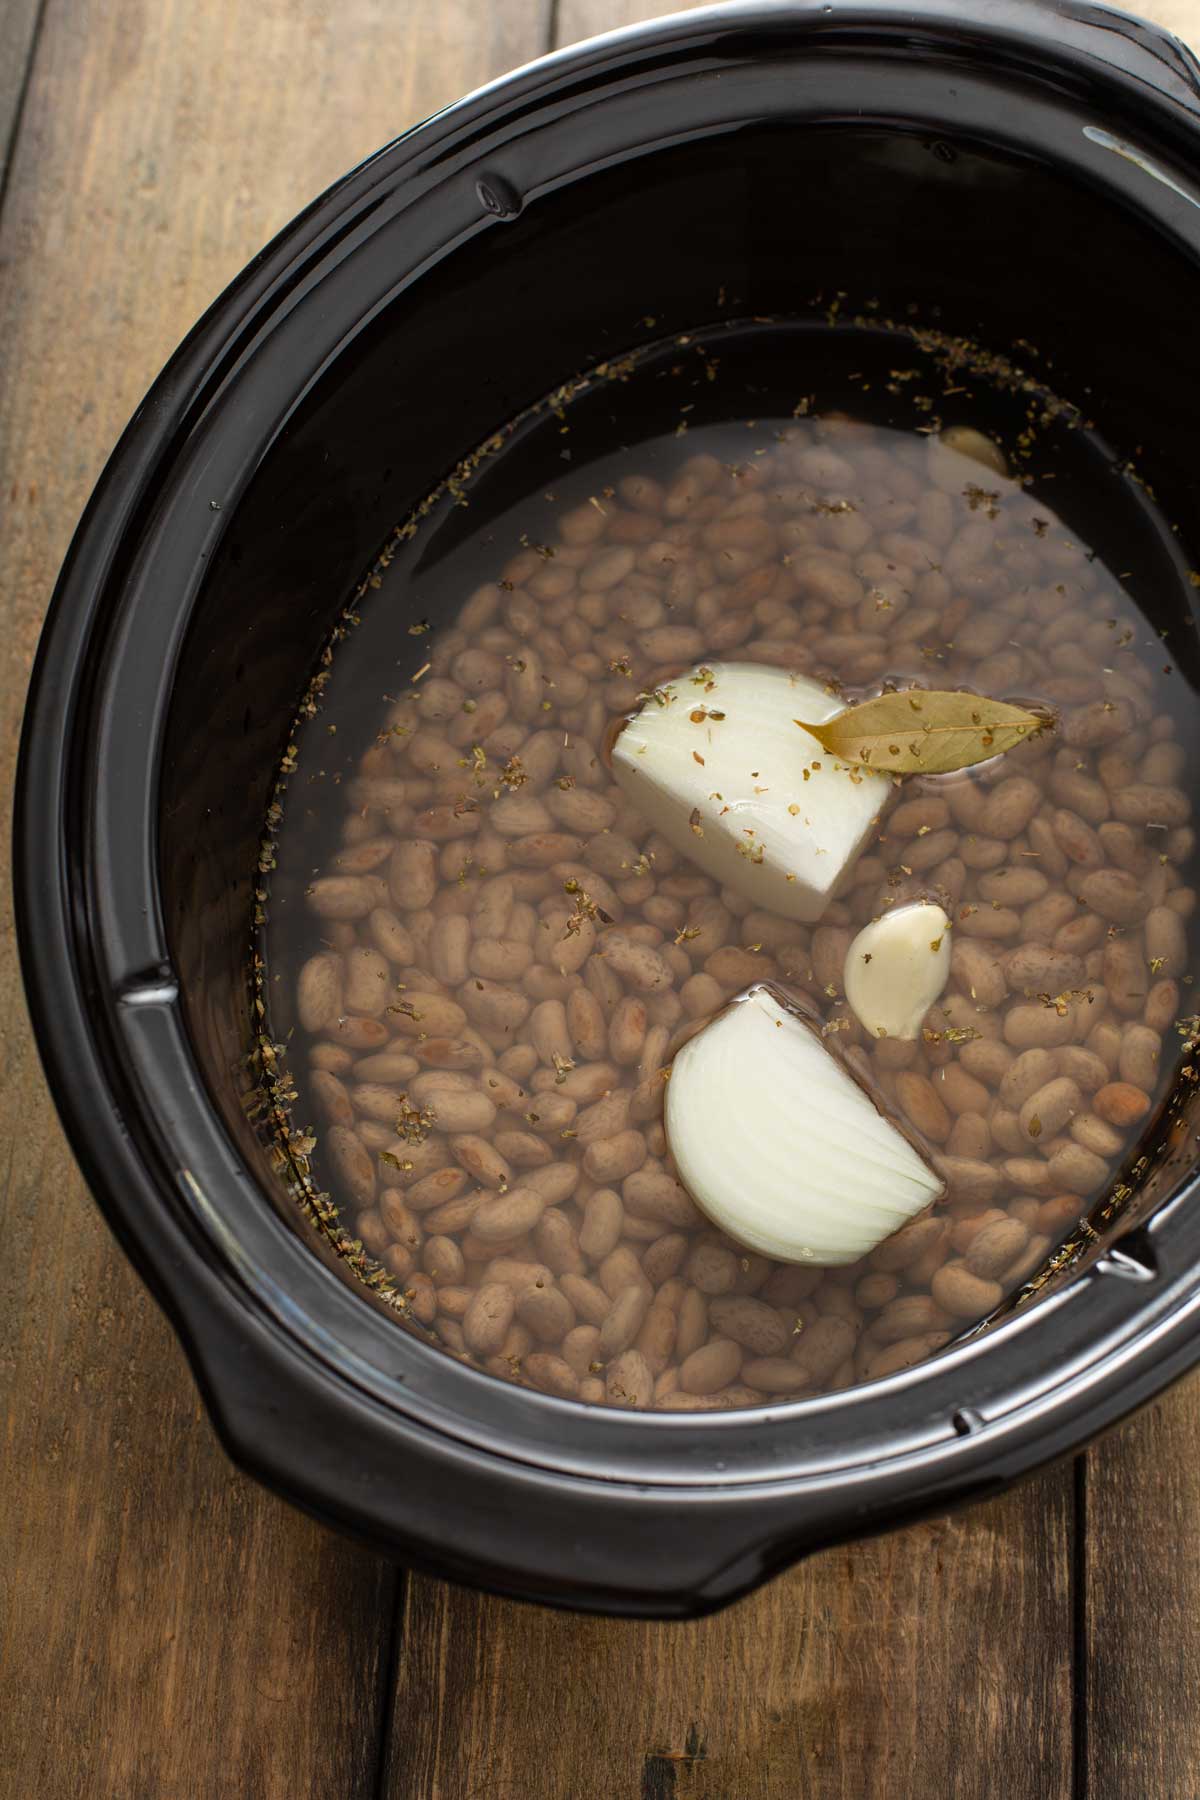 Crockpot filled with ingredients to make pinto beans.